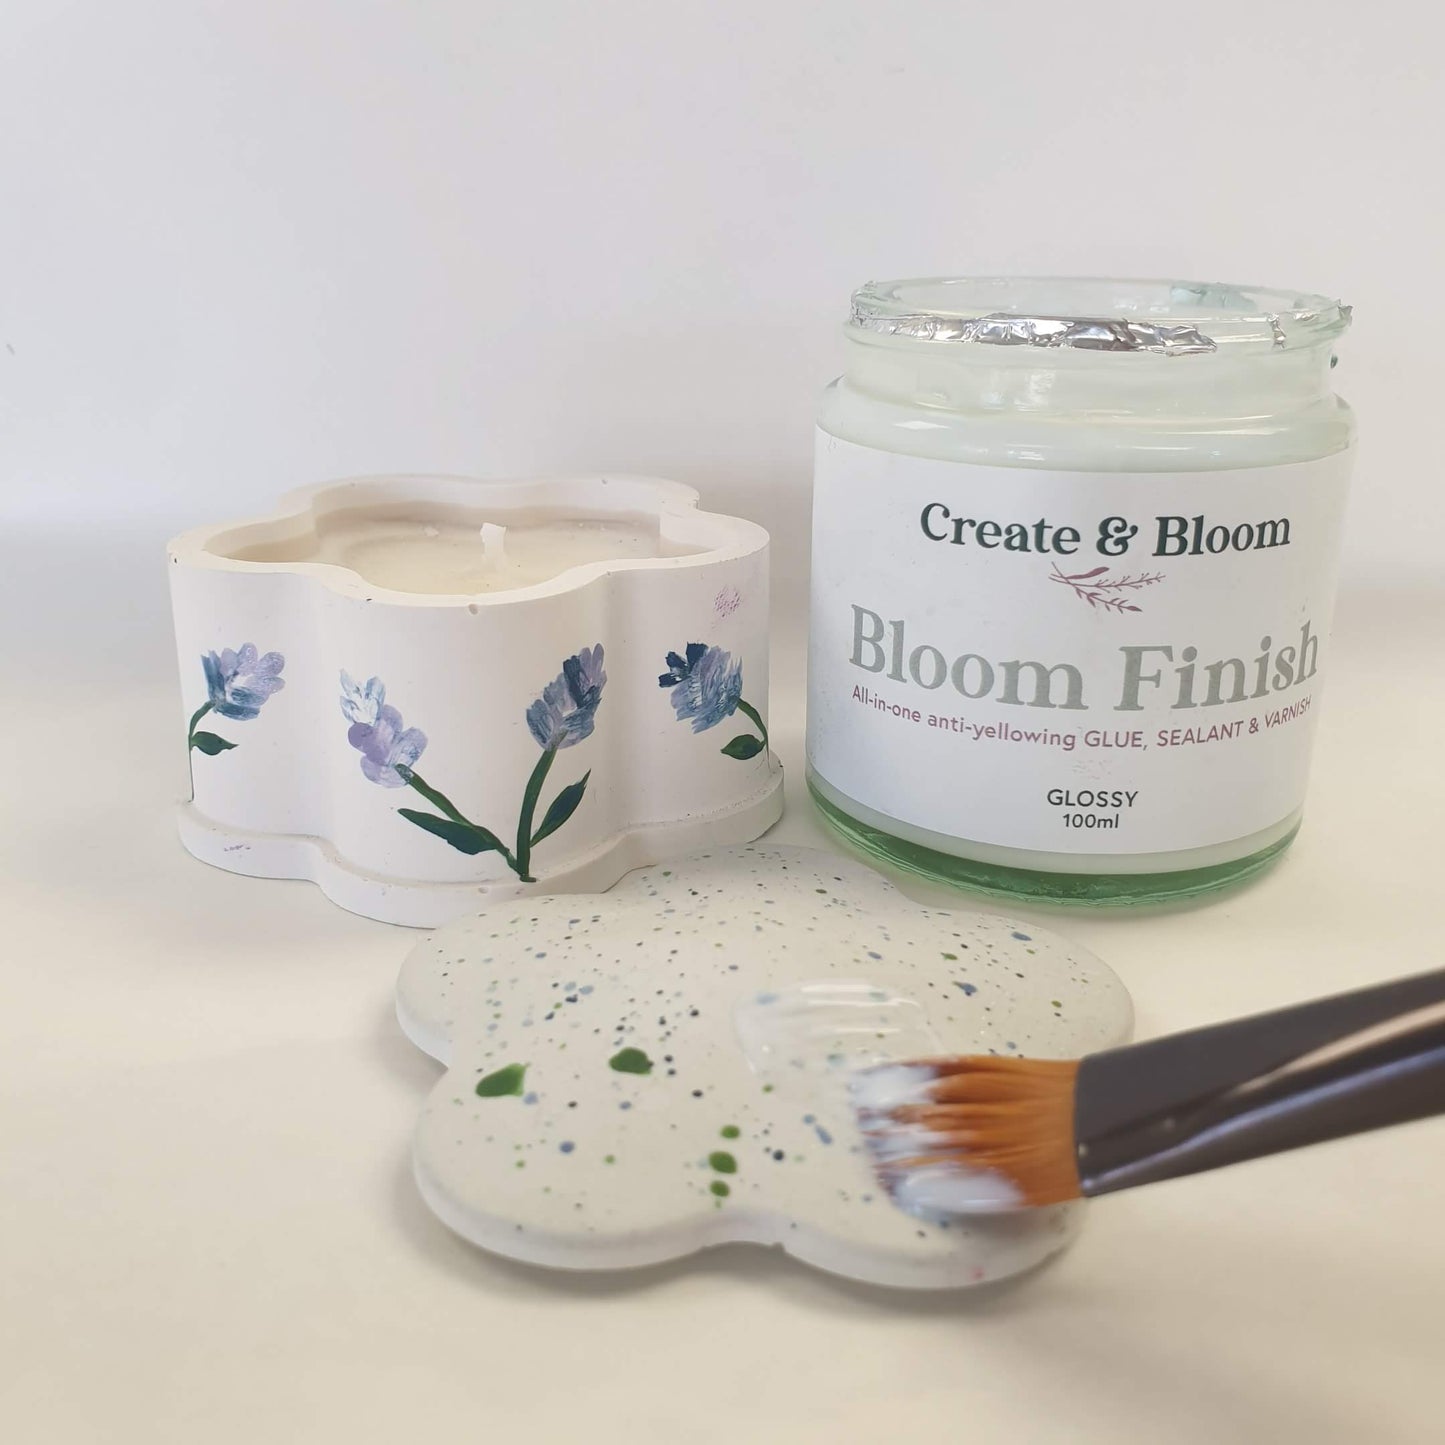 Bloom Finish GLOSSY All-in-One Fixative 100ml